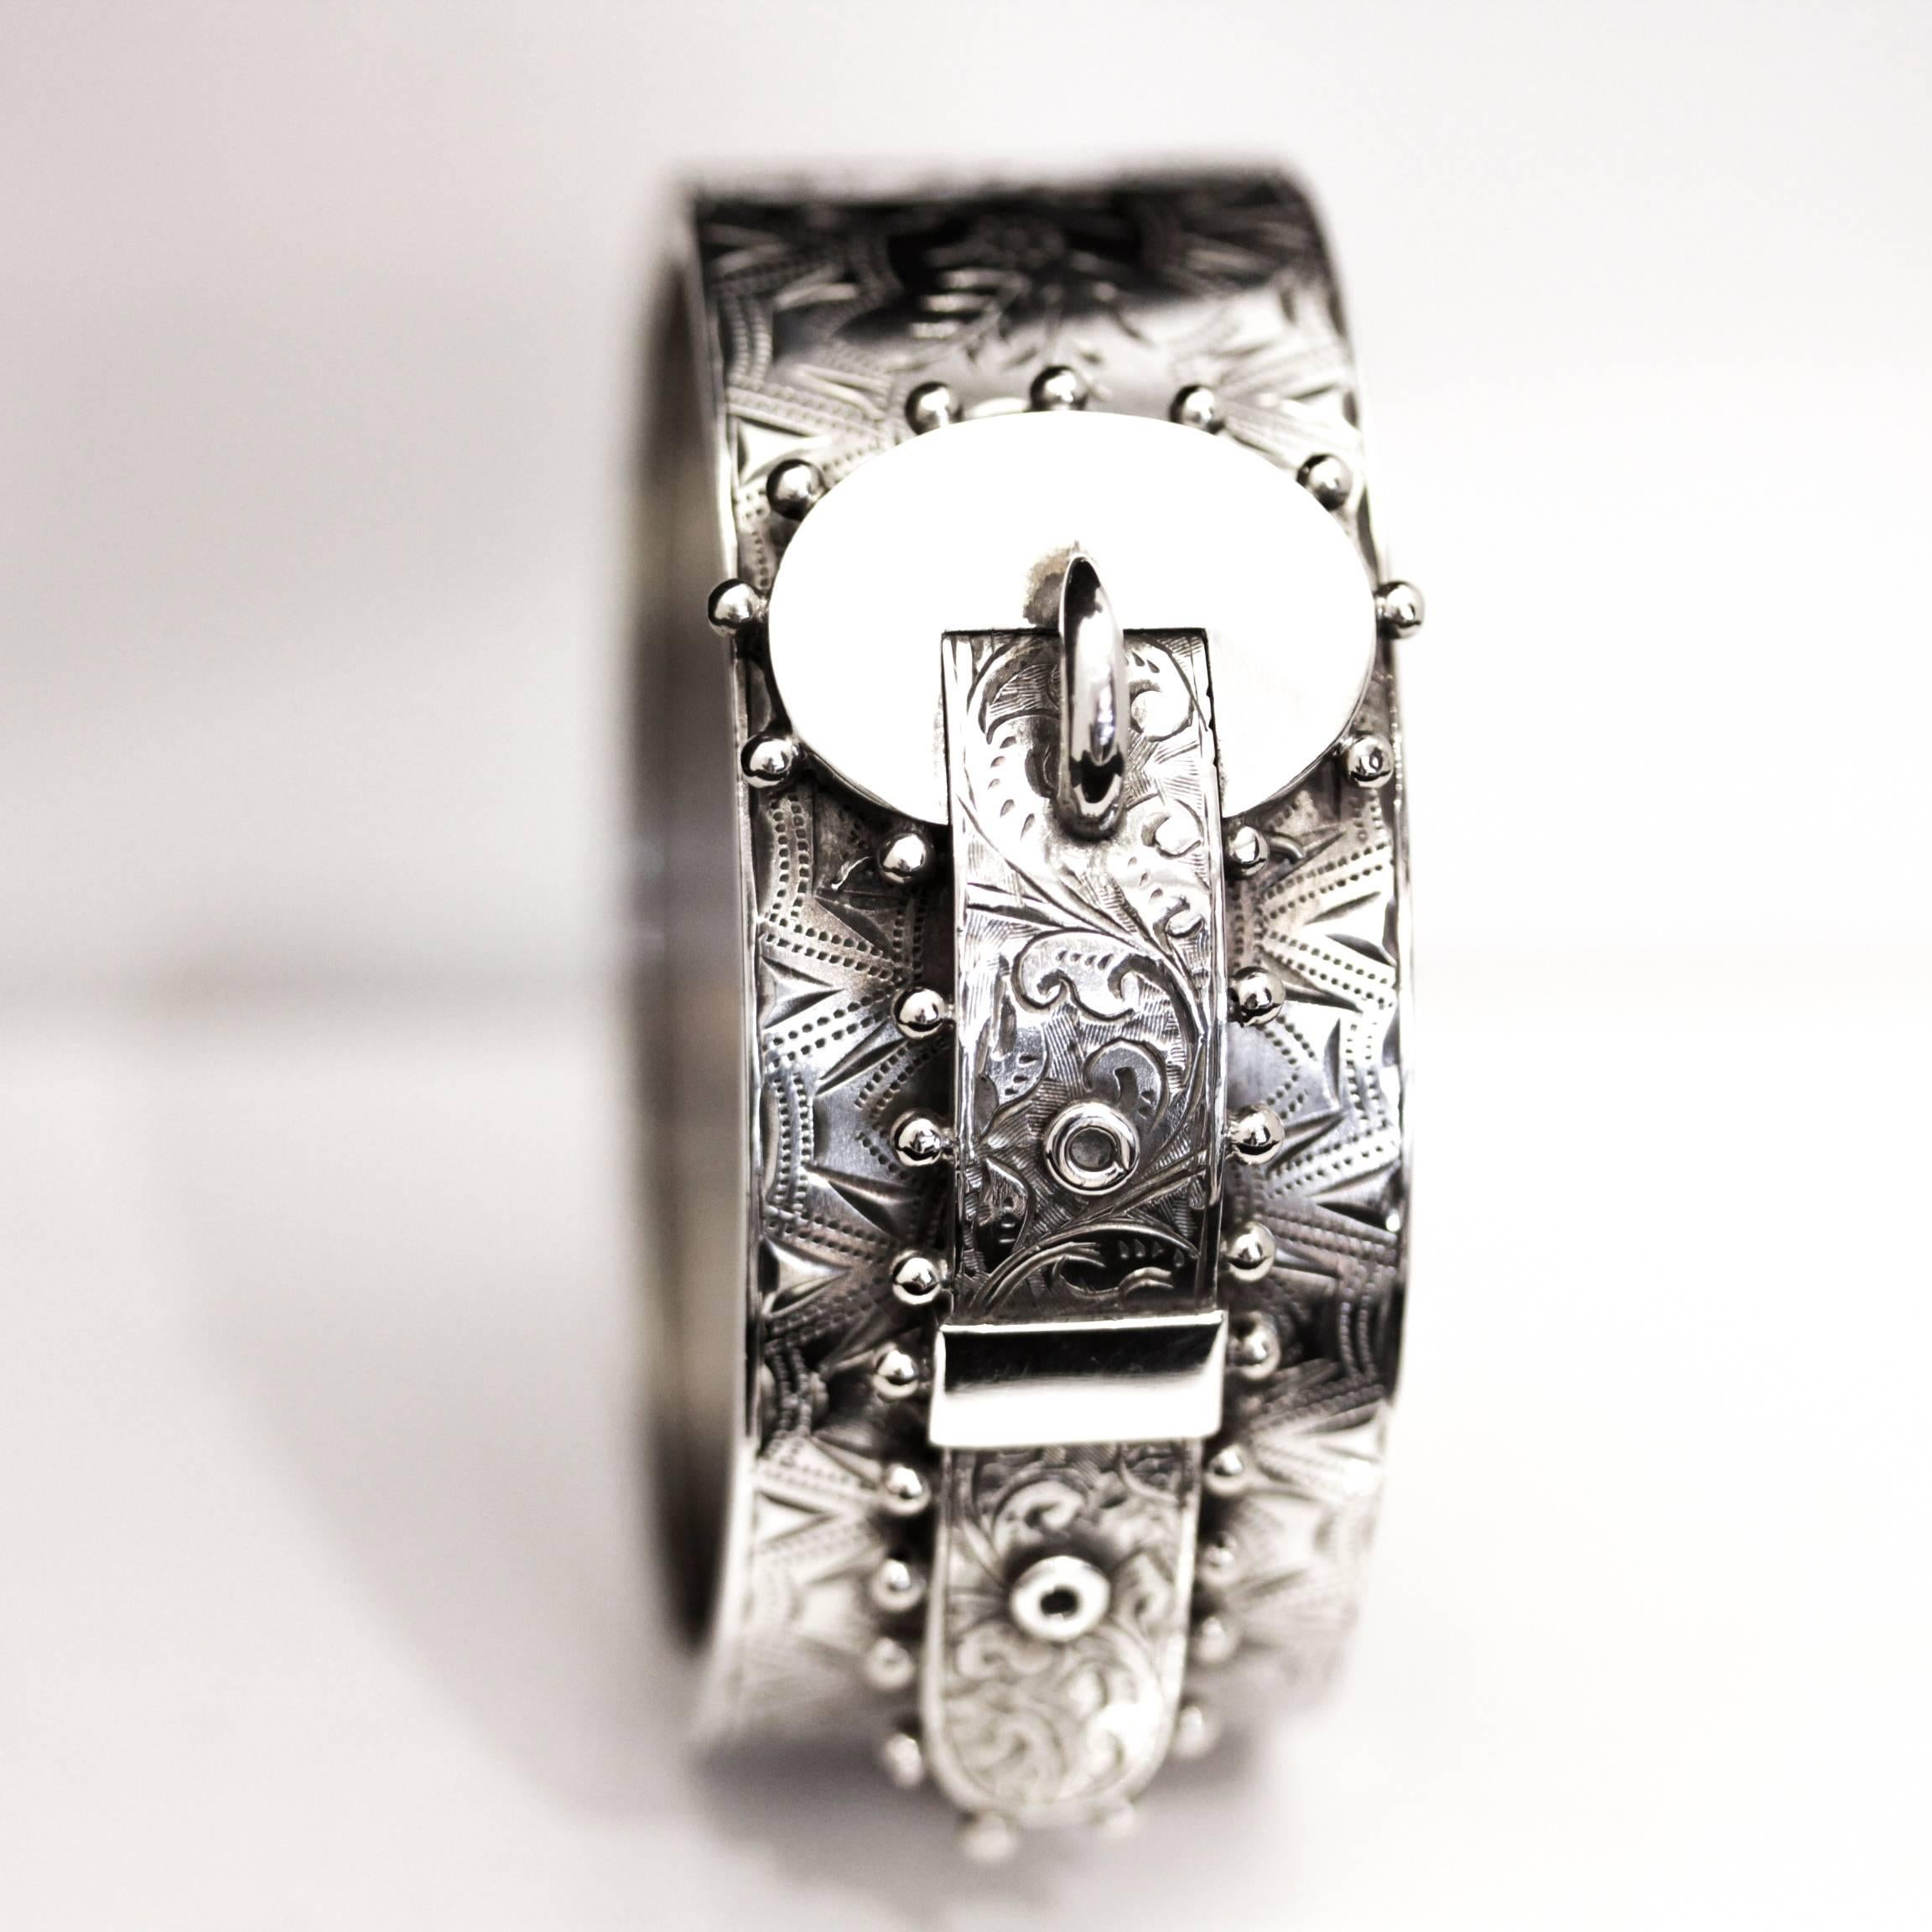 Victorian Sterling Silver Hinged Buckle Bangle Bracelet In Excellent Condition For Sale In Sydney CBD, AU